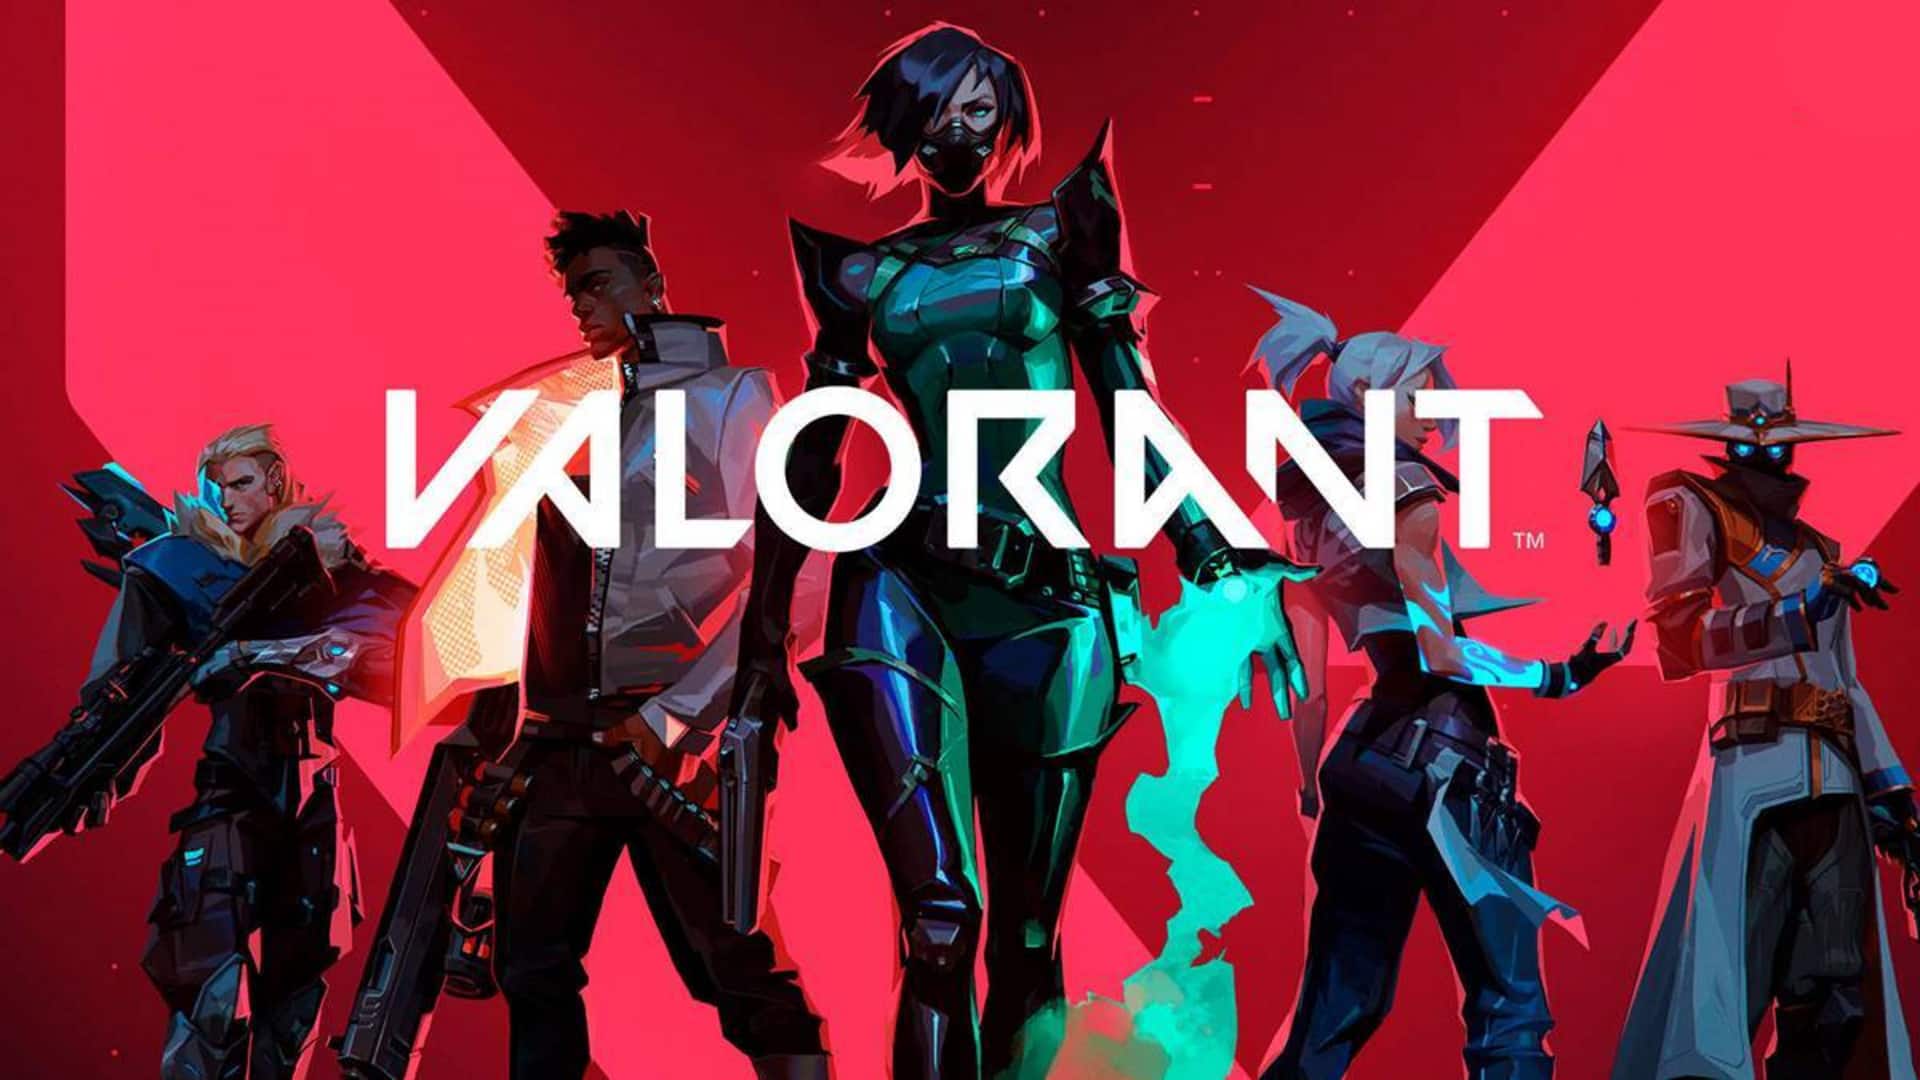 Valorant, a PC-exclusive game since launch, is coming to consoles